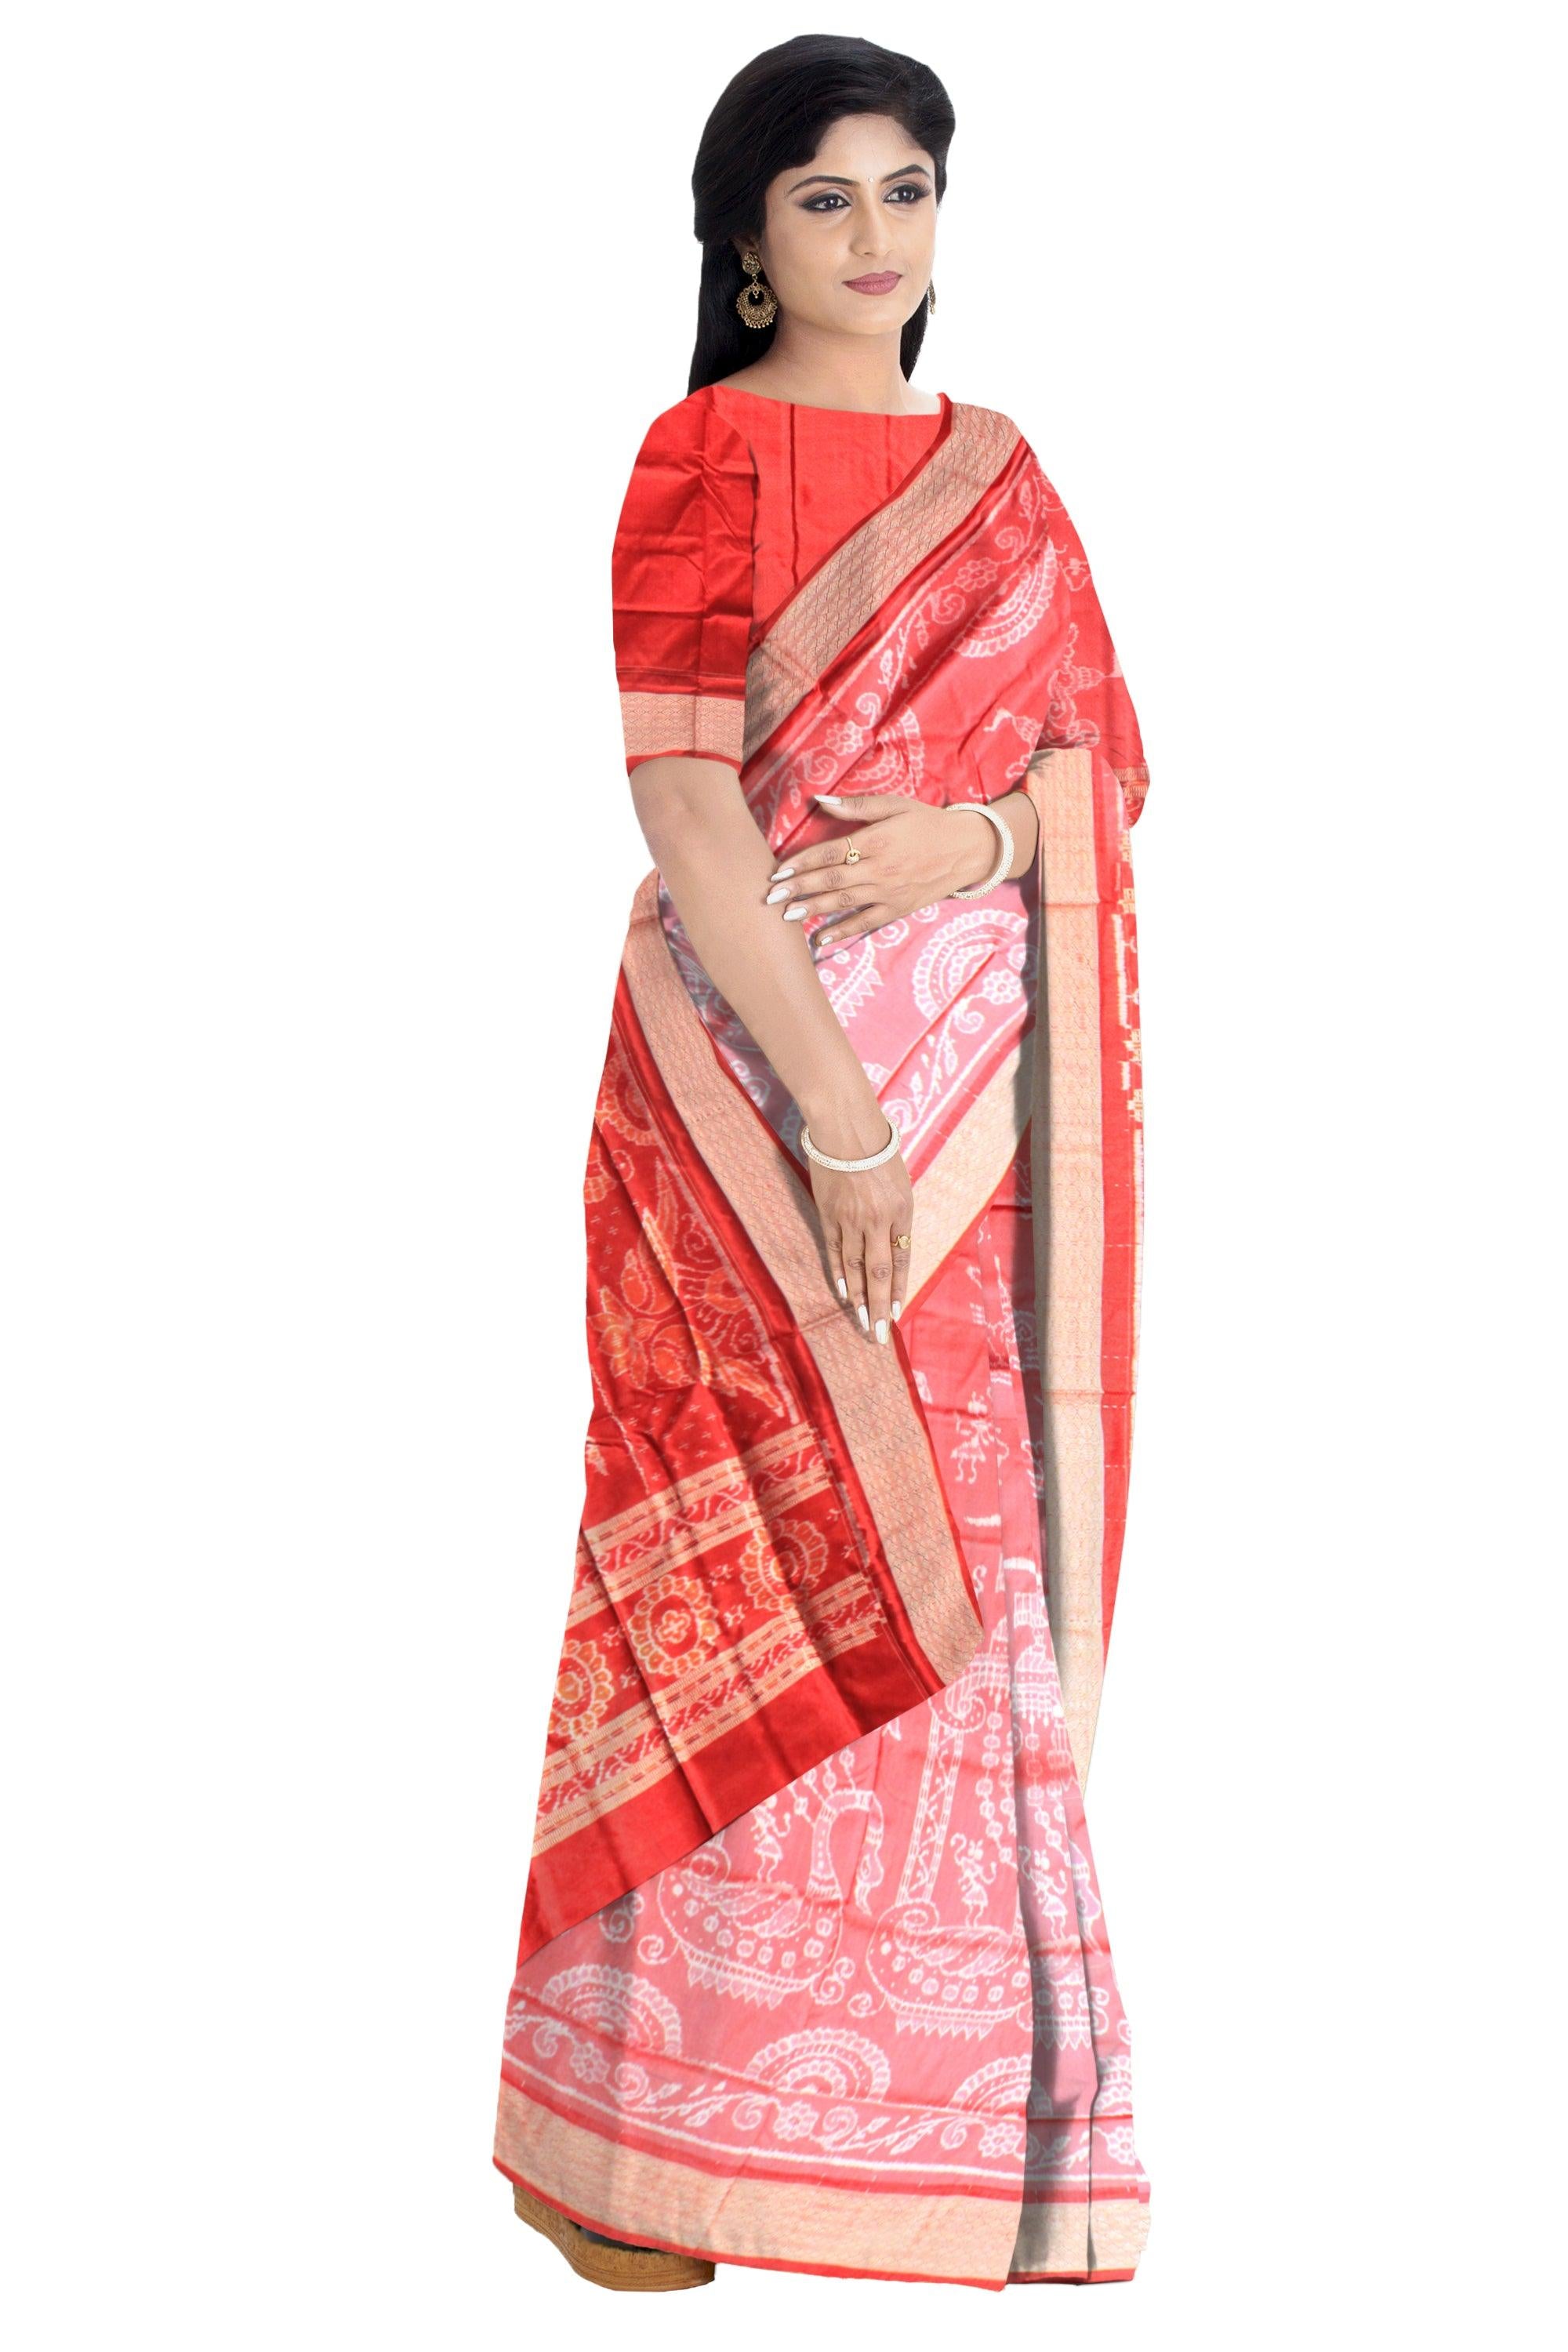 Authentic pata saree  in peacock design with red and pink color with blouse piece. - Koshali Arts & Crafts Enterprise